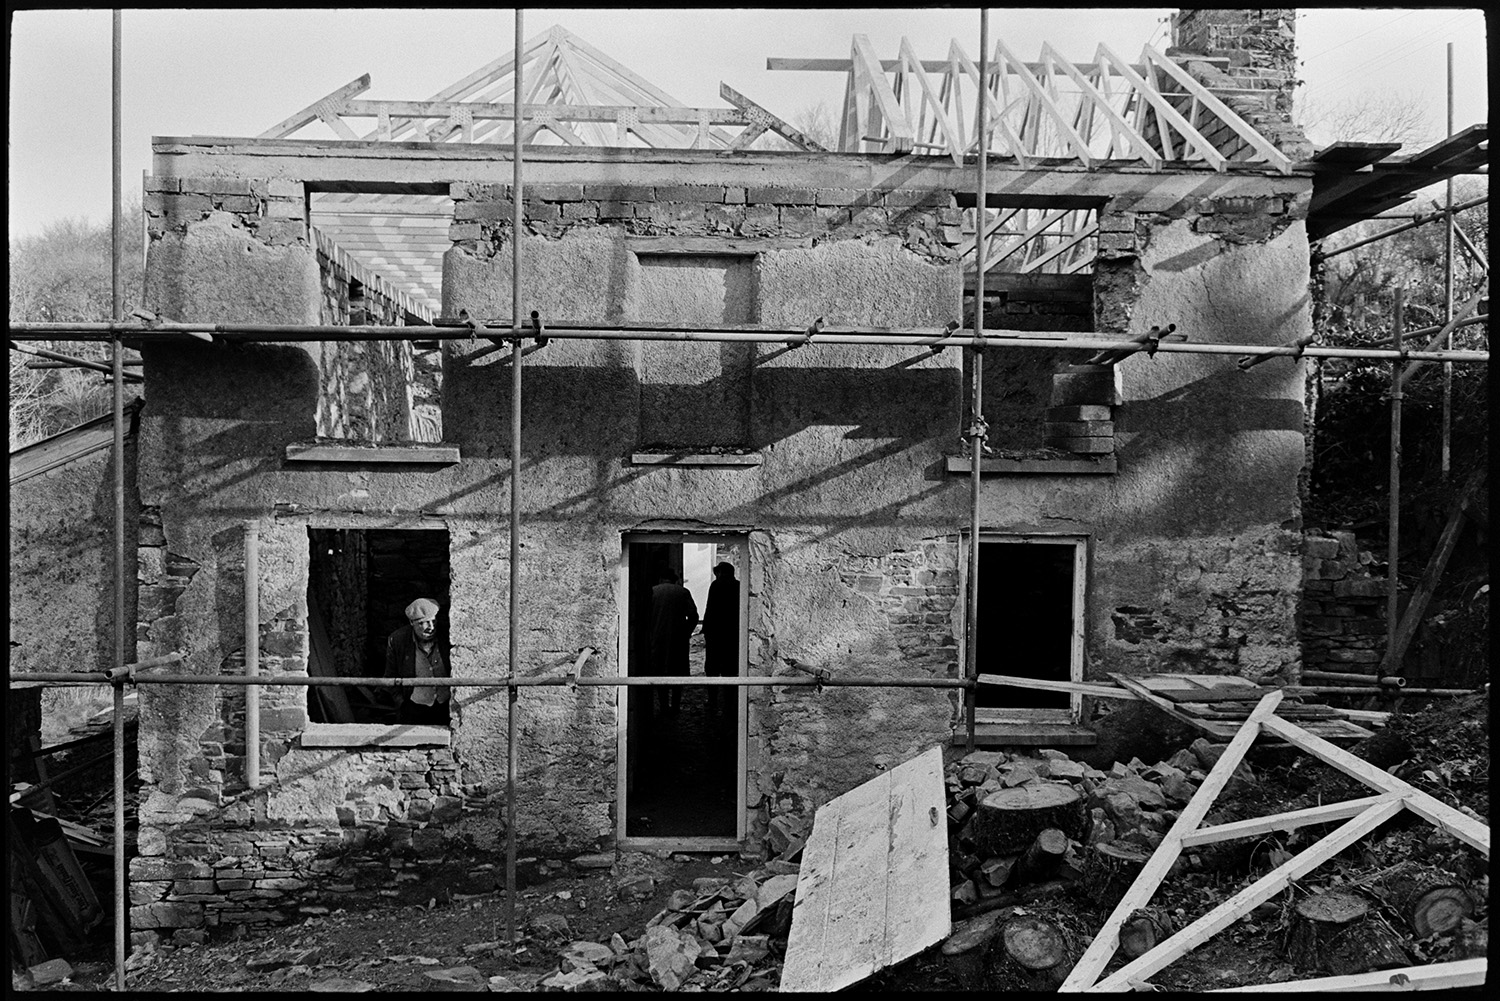 Man rebuilding roof of house another looking on, scaffolding. View of front of house.
[George Ayre looking out of a cottage window at Millhams, Dolton during renovation work. Wood roof timbers and cob walls are visible behind scaffolding, with building debris on the ground.]